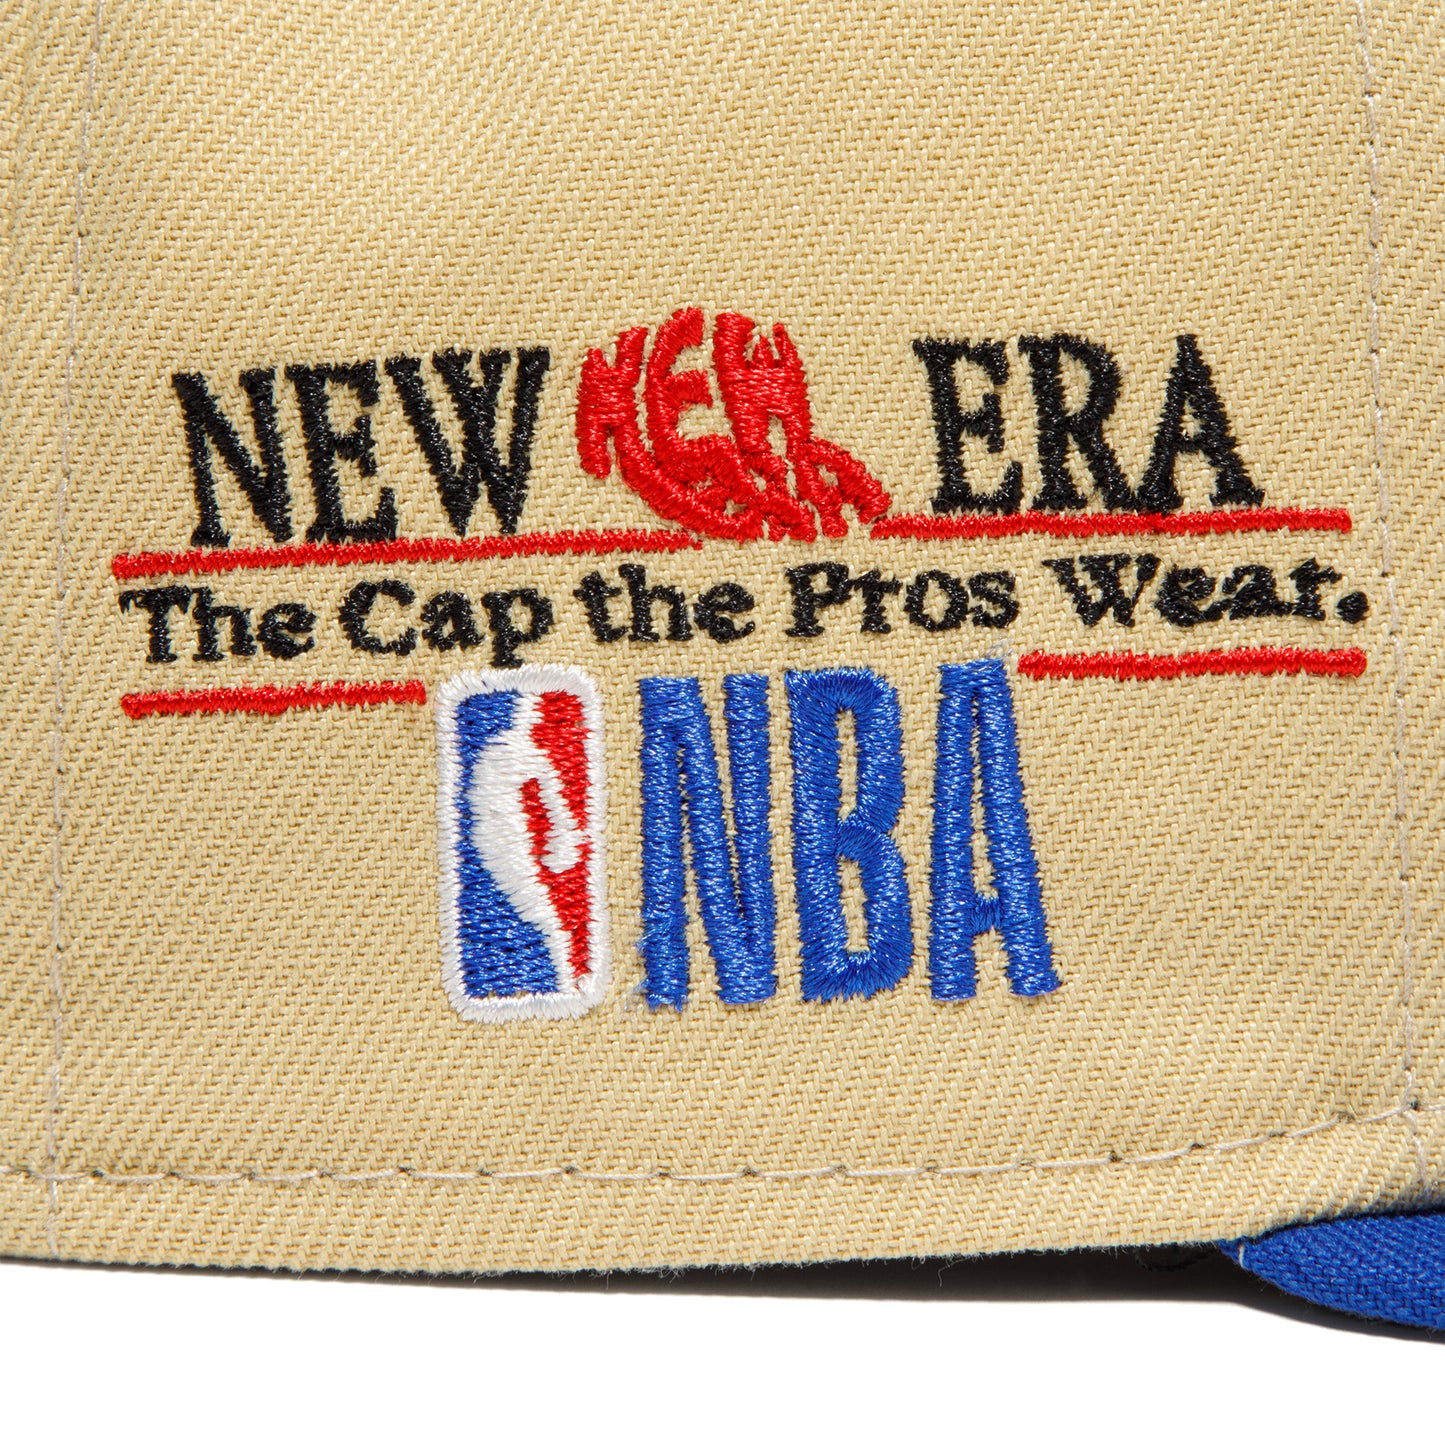 New Era New York Knicks 59Fifty Fitted Hat (Vintage Blue)